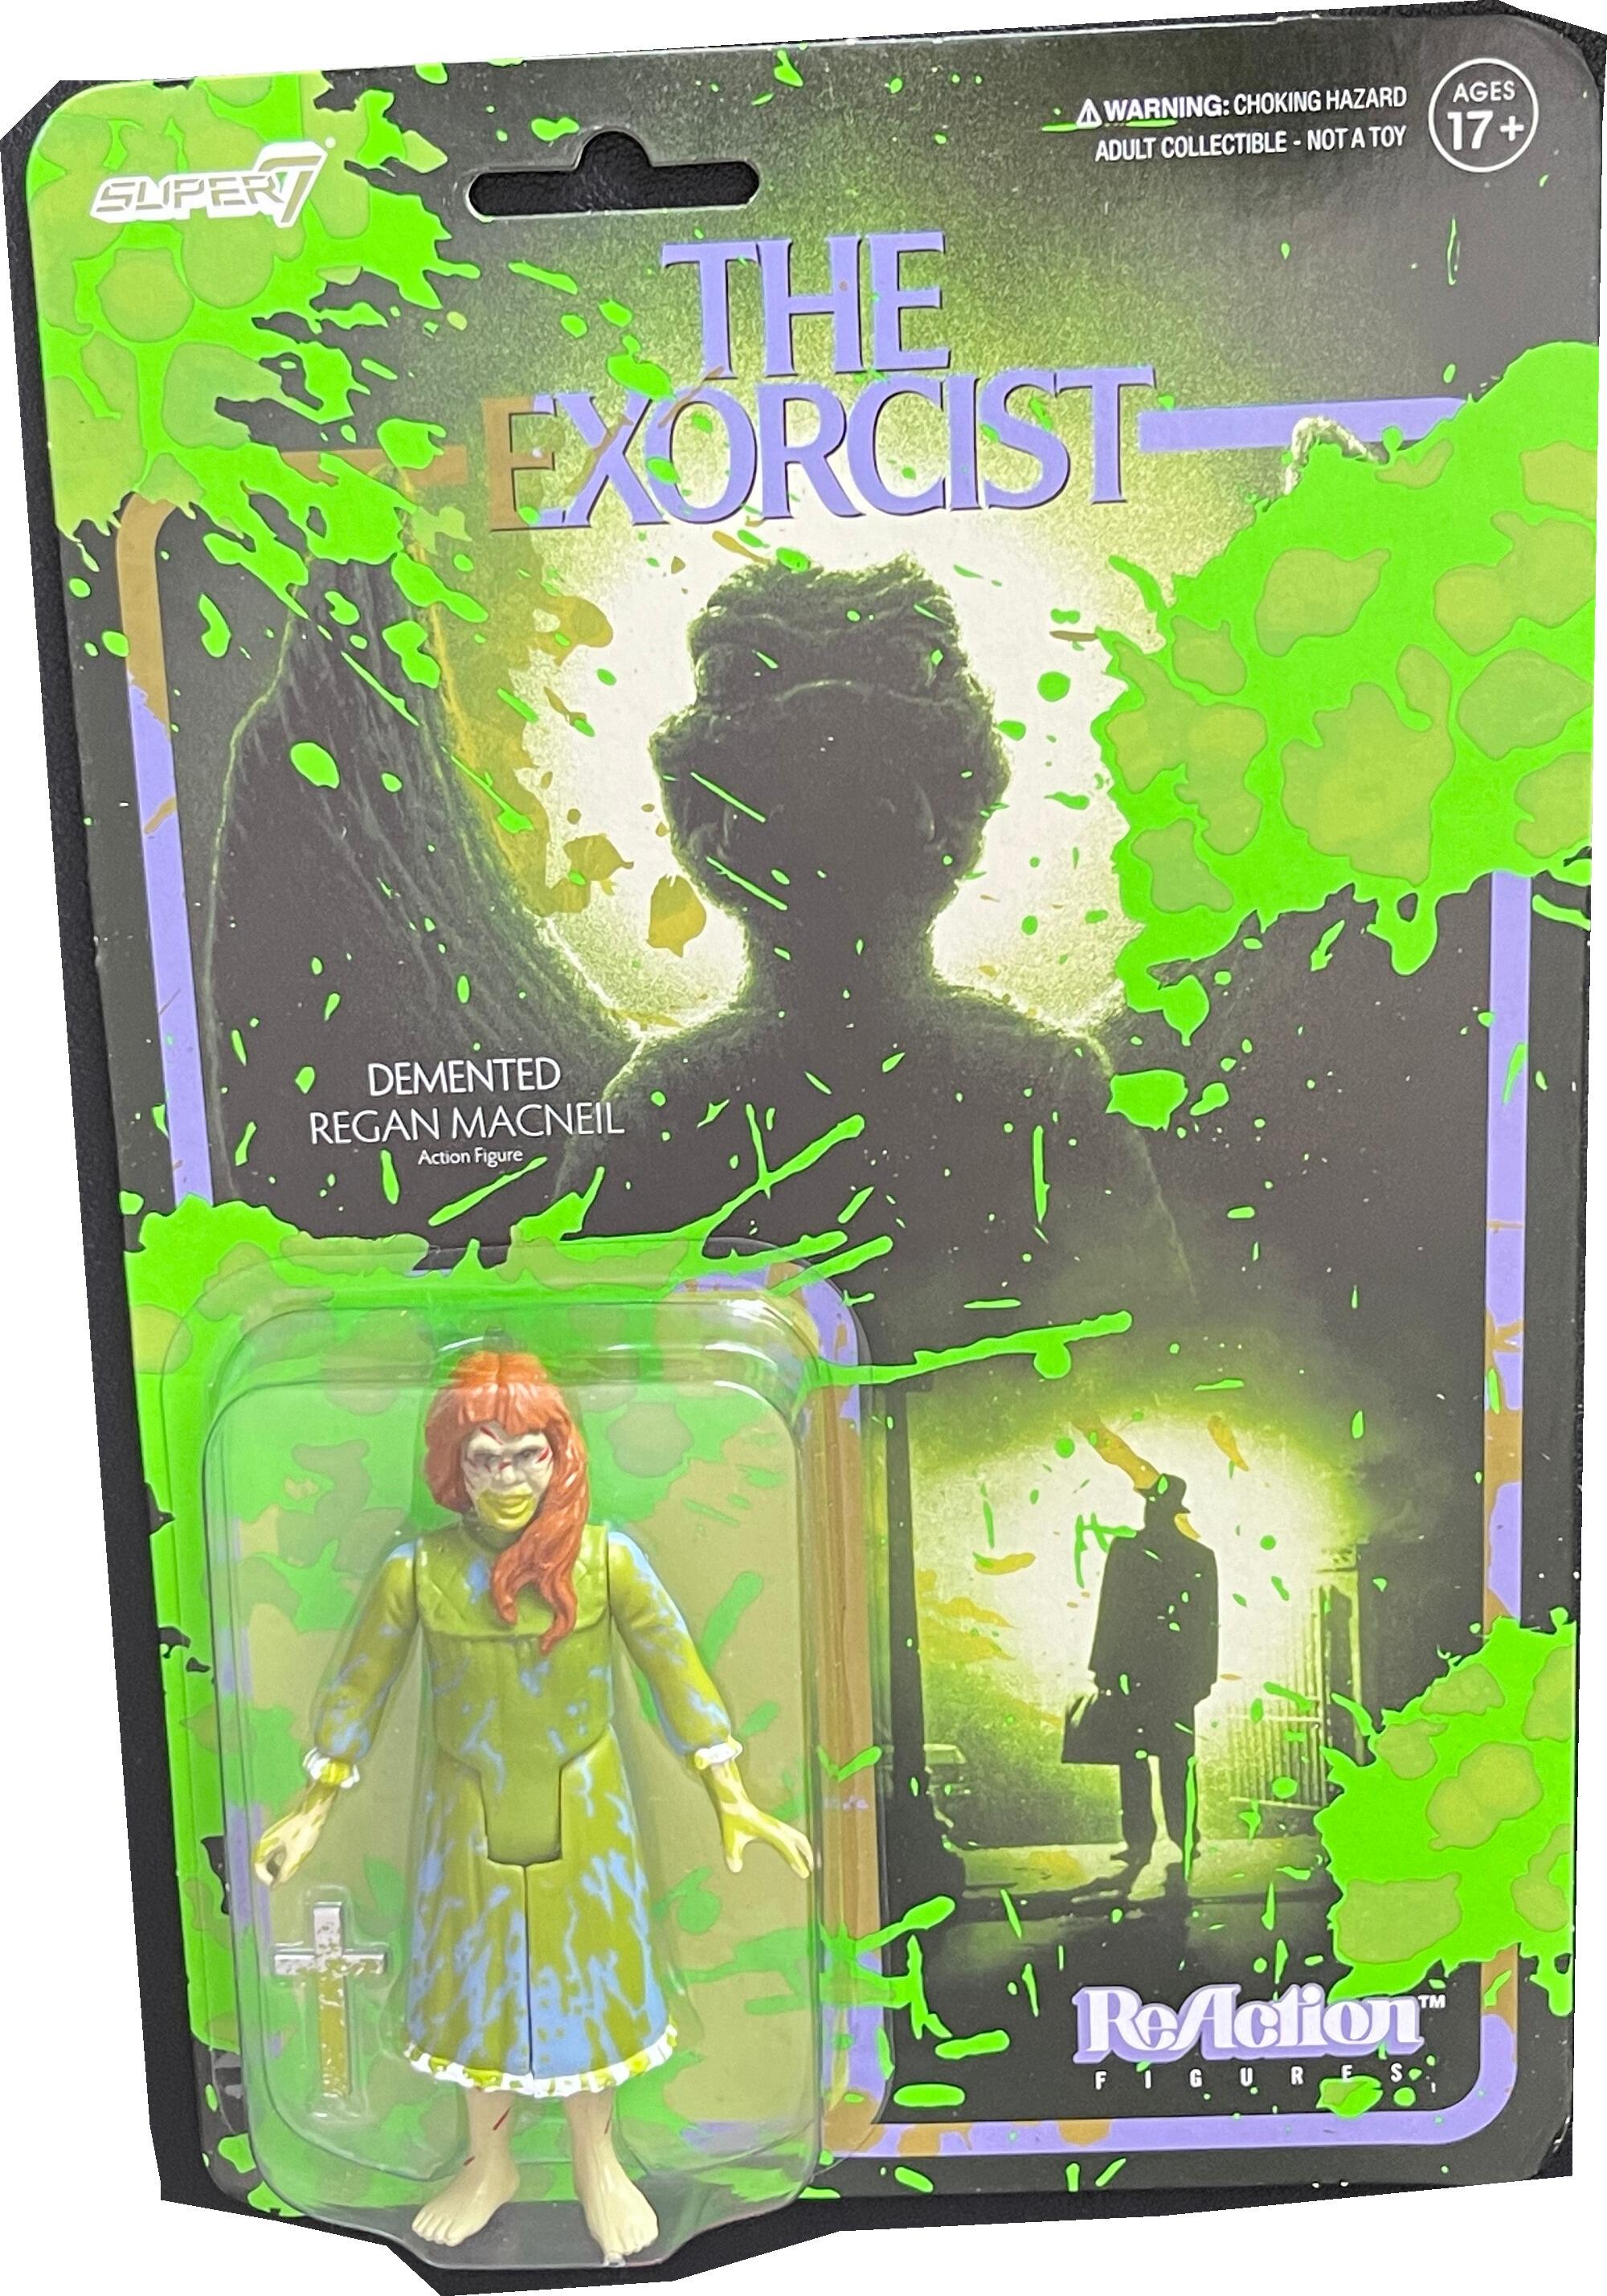 The Exorcist ReAction Wave 2 - Demented Regan  Macneil (Vomit Splatter) figure , 3.75 inches tall from Super7